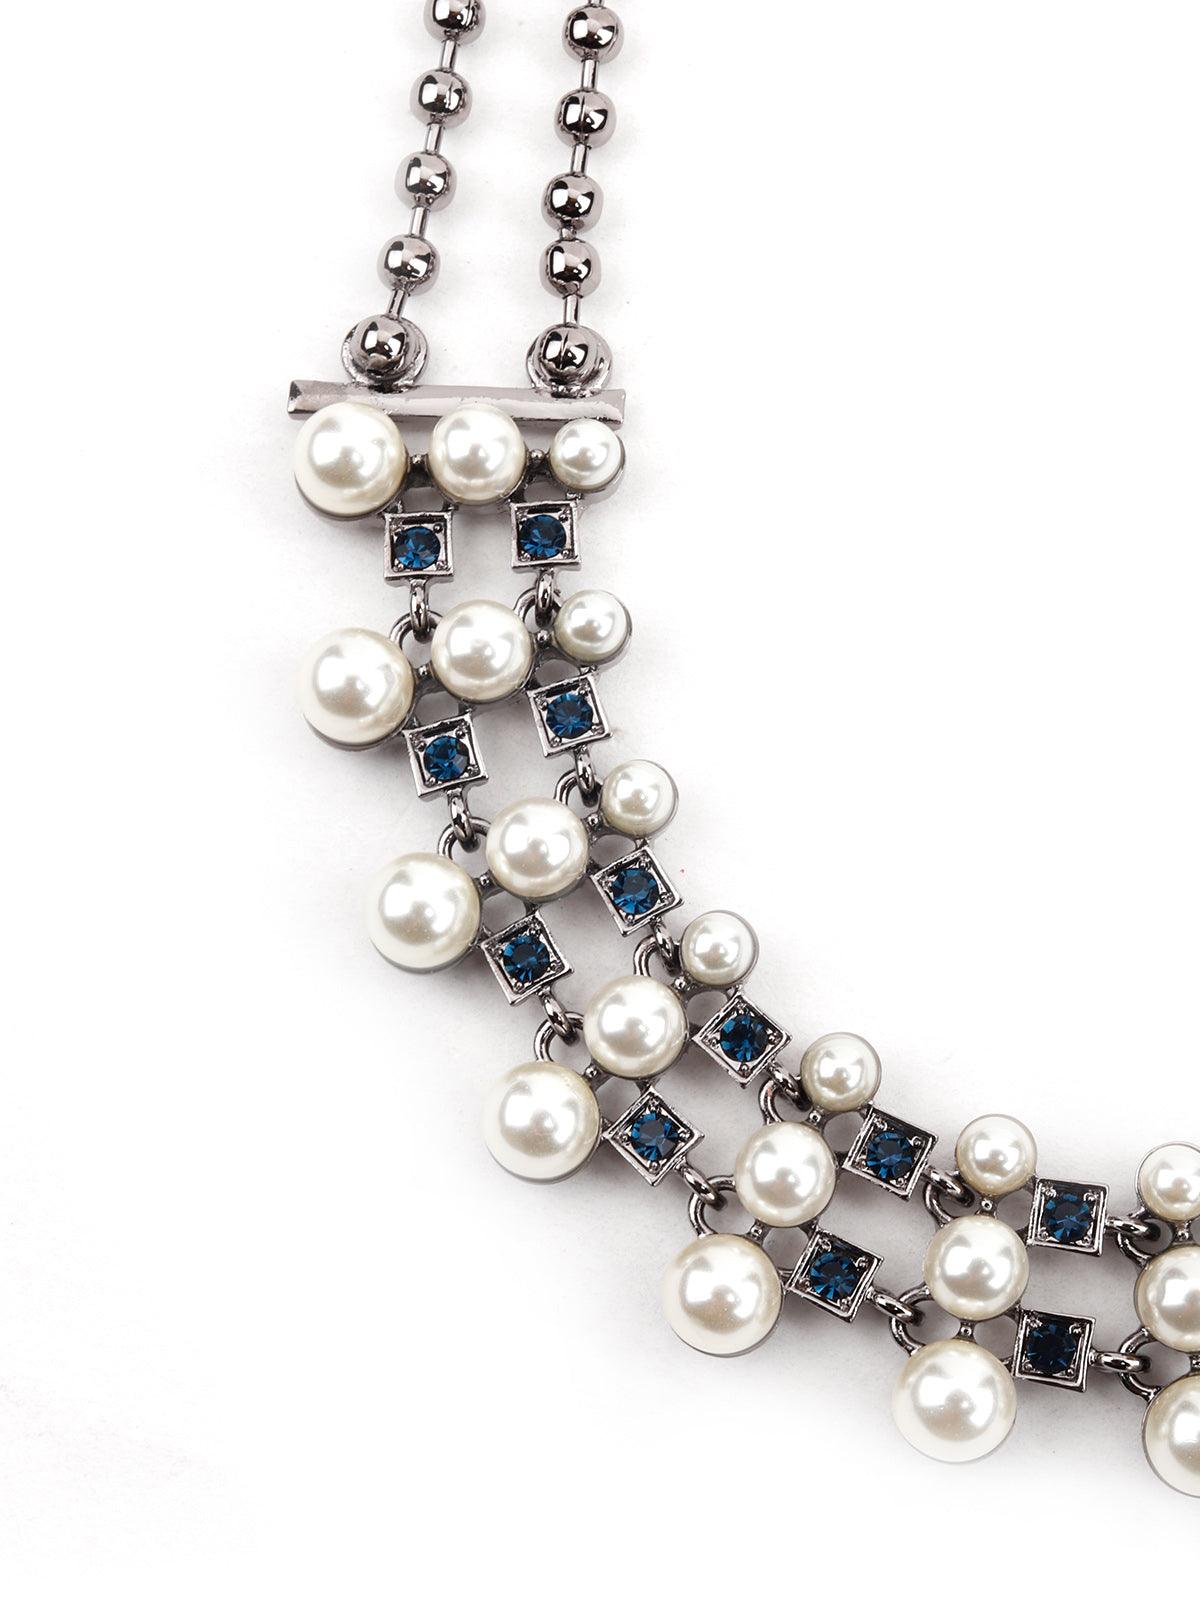 Pearl and Dark Blue Stones Necklace - Odette